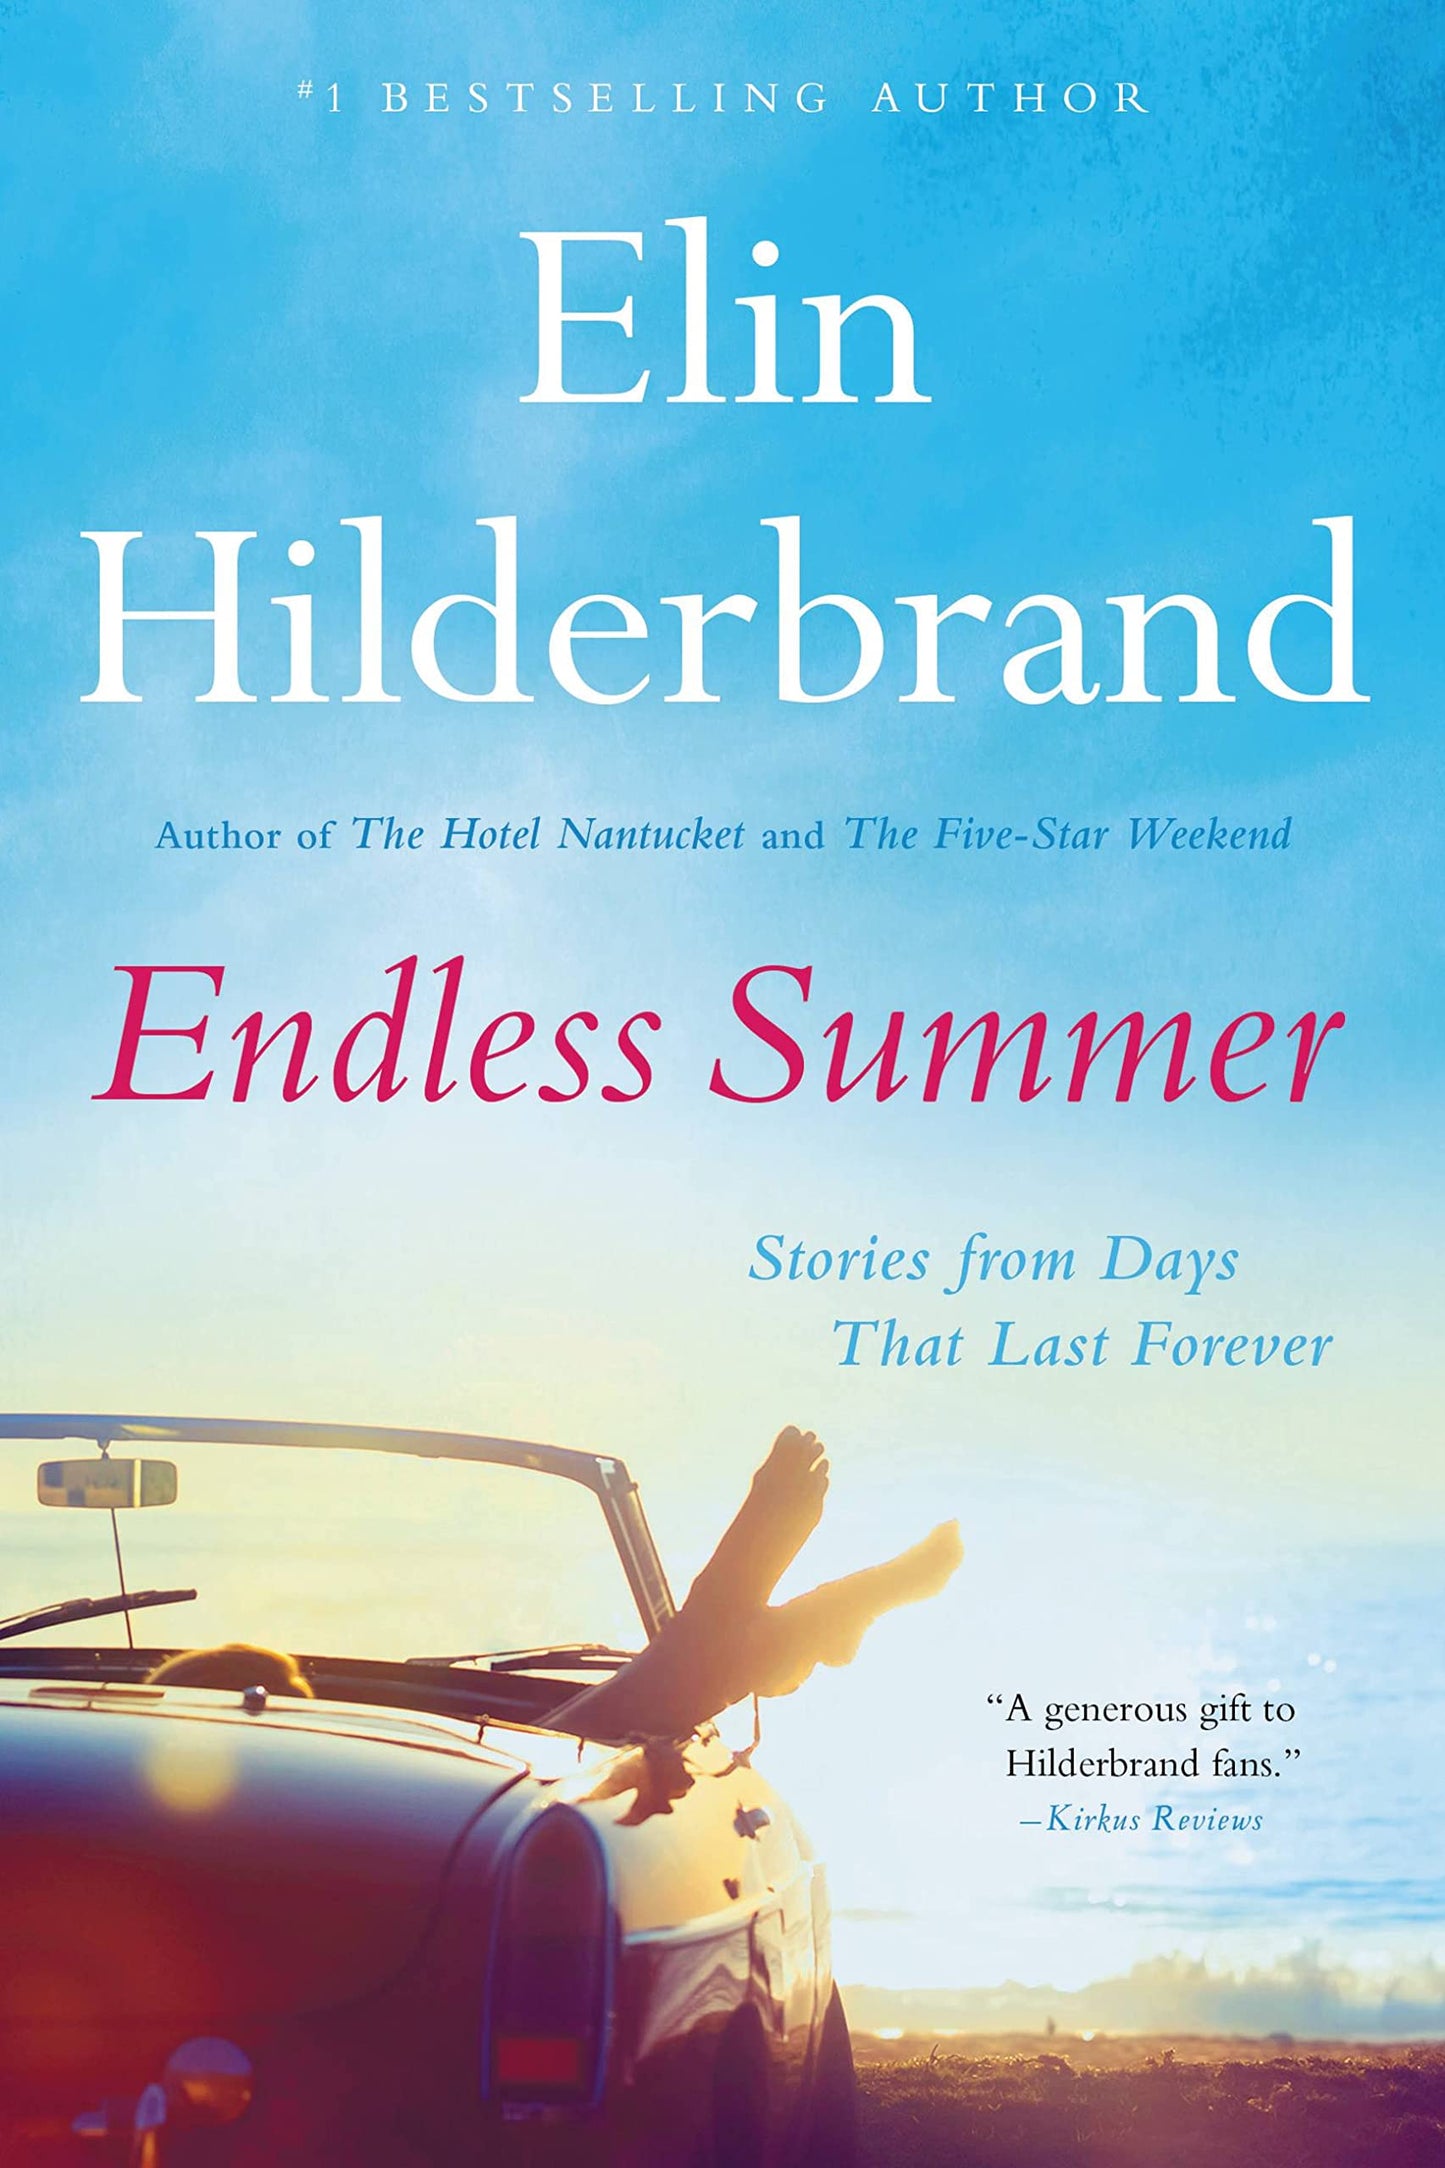 Endless Summer: Stories from Days That Last Forever